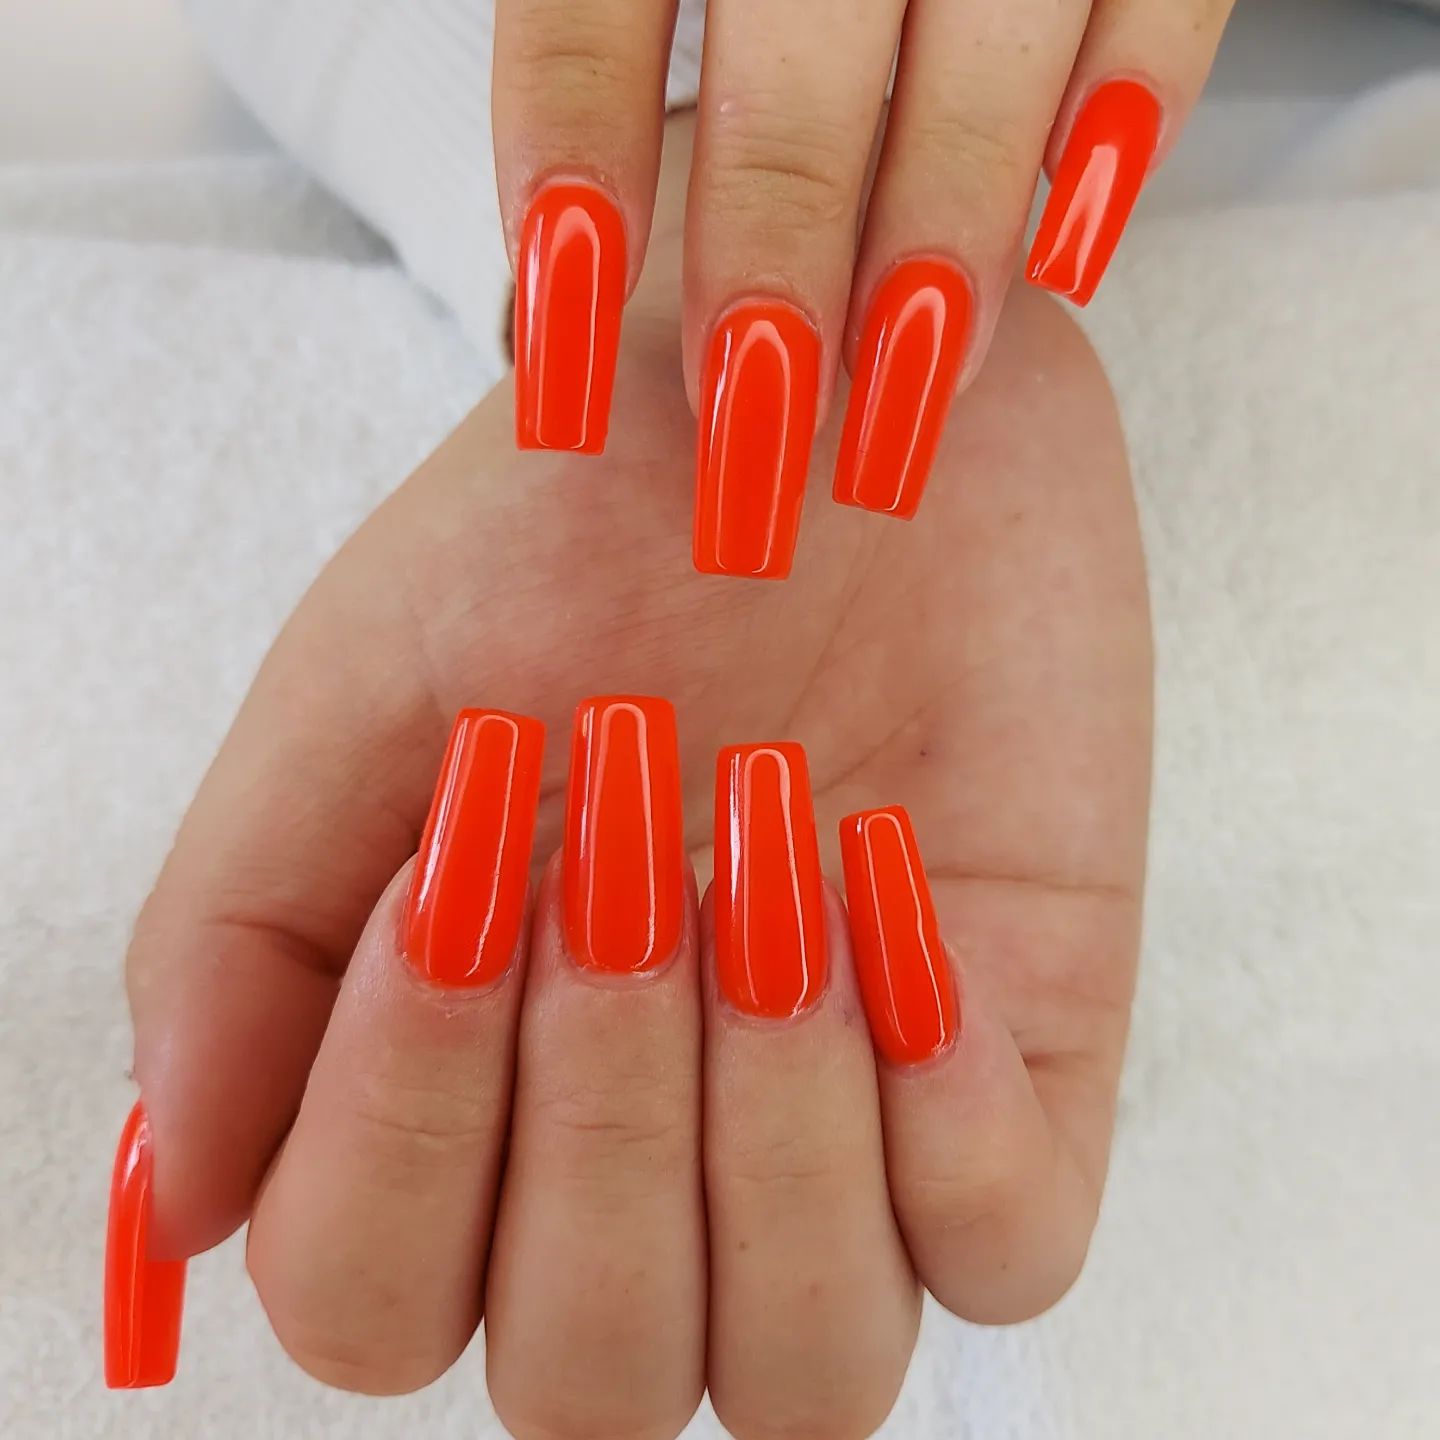 Let's imagine that you are at the beach and you have these amazing bright neon nails that are quite matching with sand.